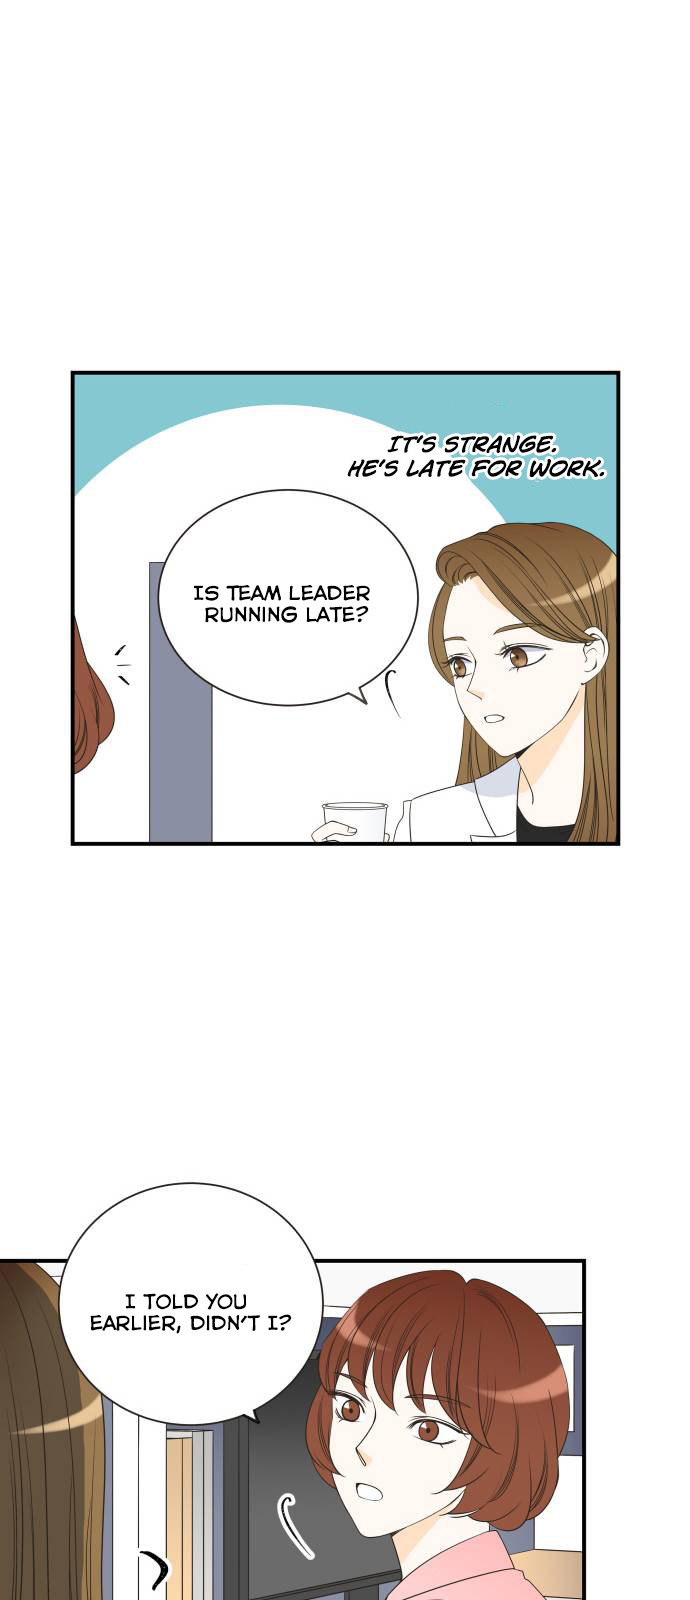 It Is My First Love Vol. 1 Ch. 22